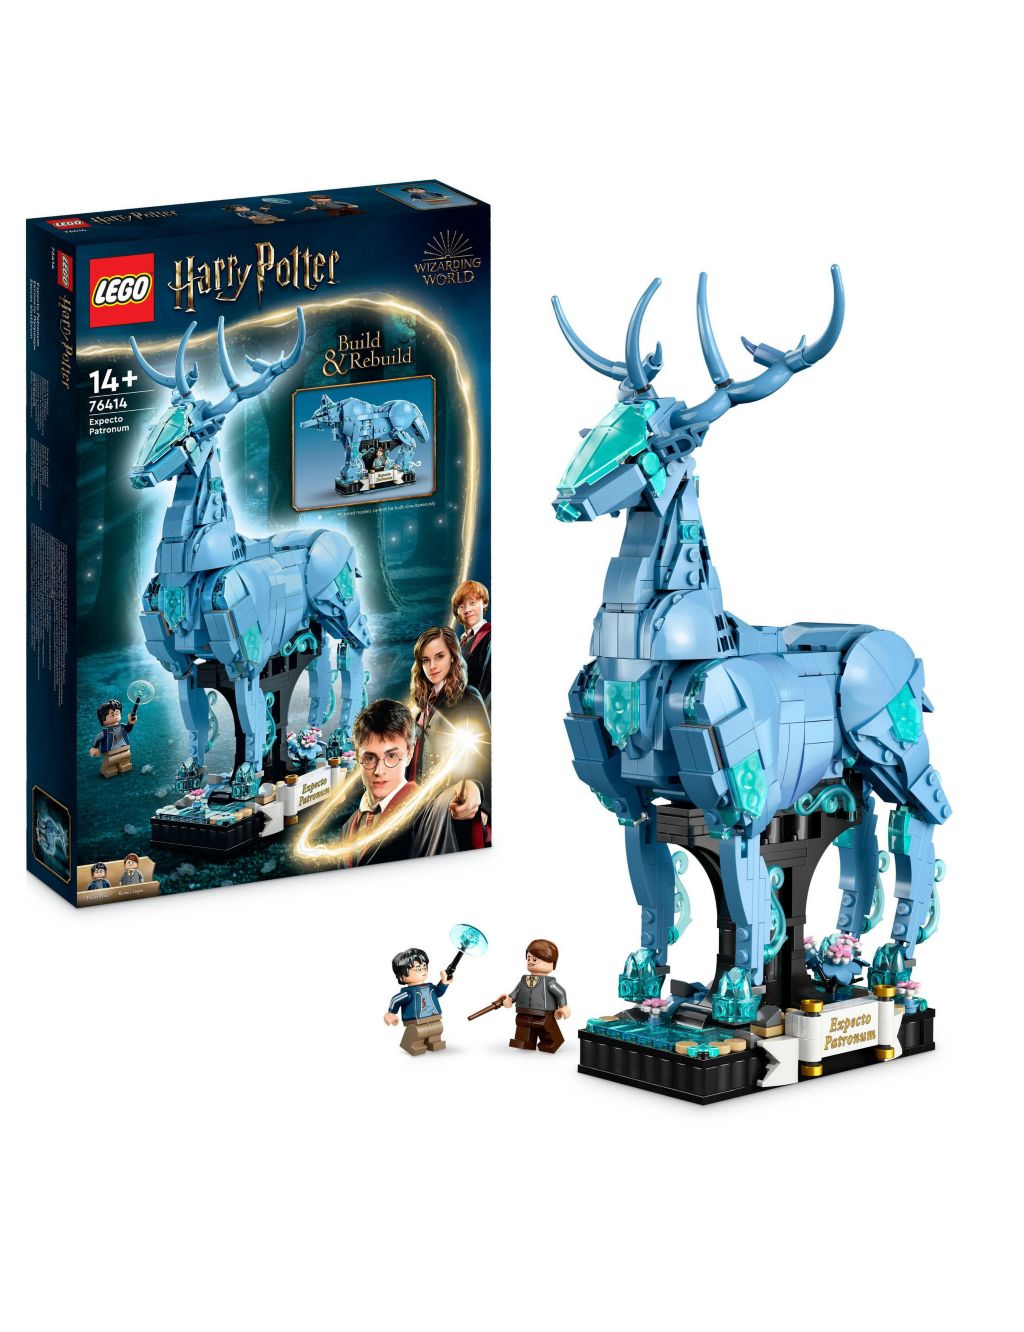 LEGO Harry Potter Expecto Patronum 2-in-1 Set (14+ Yrs)